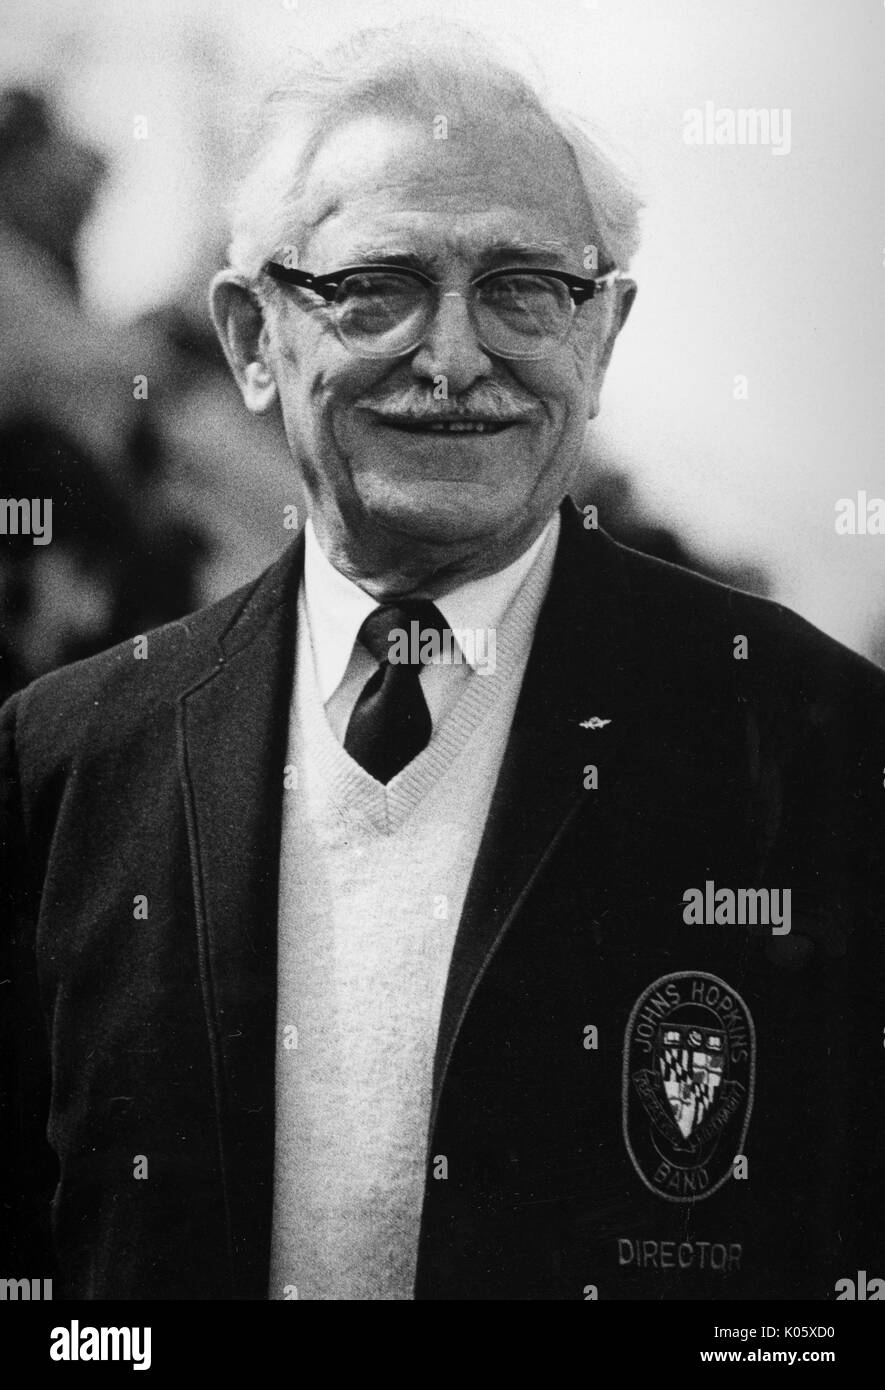 Half-length portrait of Music Director Conrad Gebelein, wearing a dark jacket with a sweater and tie underneath, has a smiling facial expression and glasses, 1960. Stock Photo